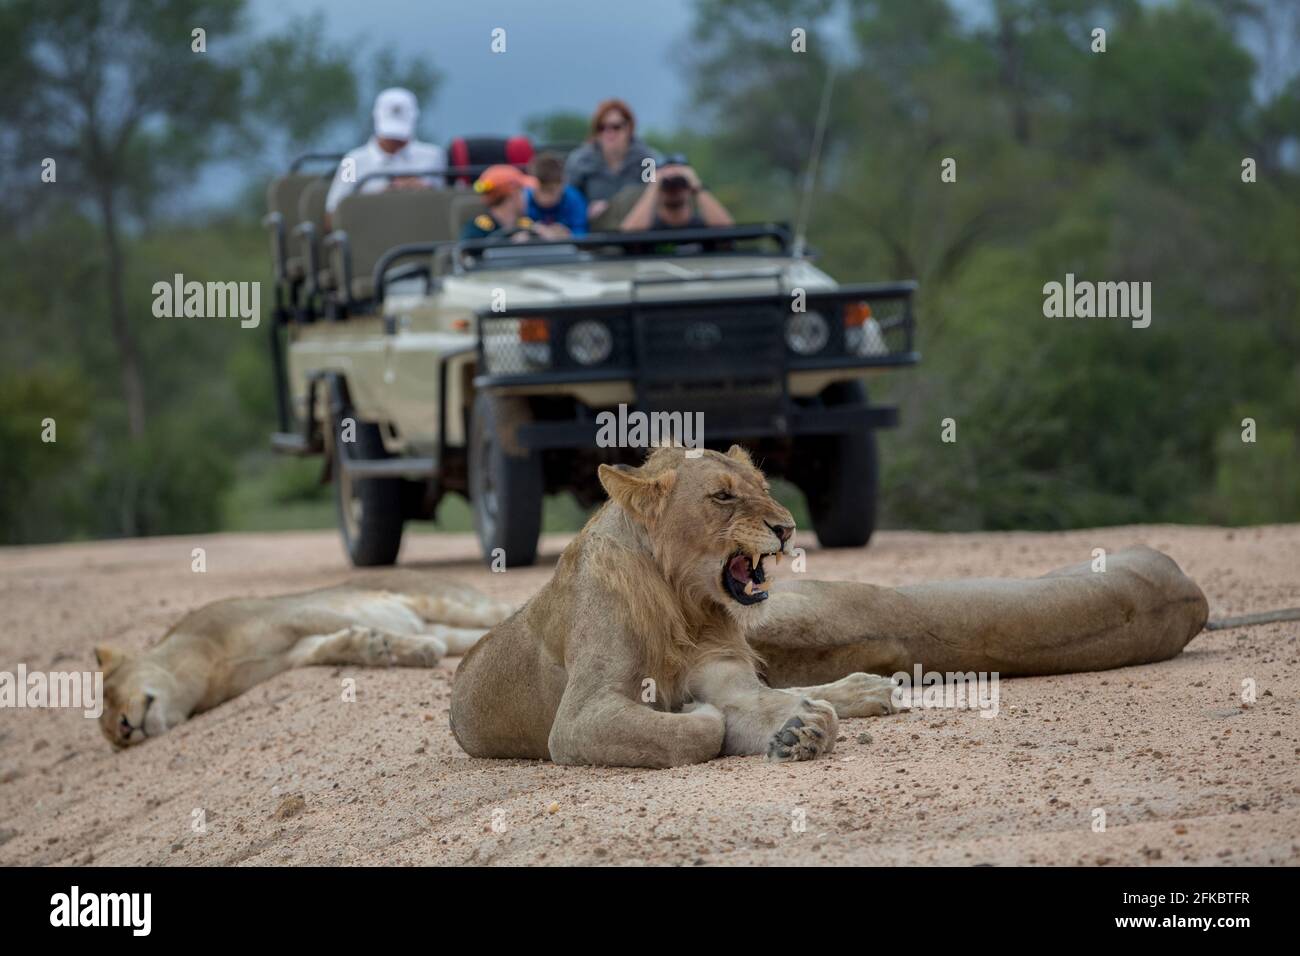 A lioness snarling and watched on by tourists on a game drive in Sabie Sands Game Reserve, Mpumalanga South Africa Stock Photo